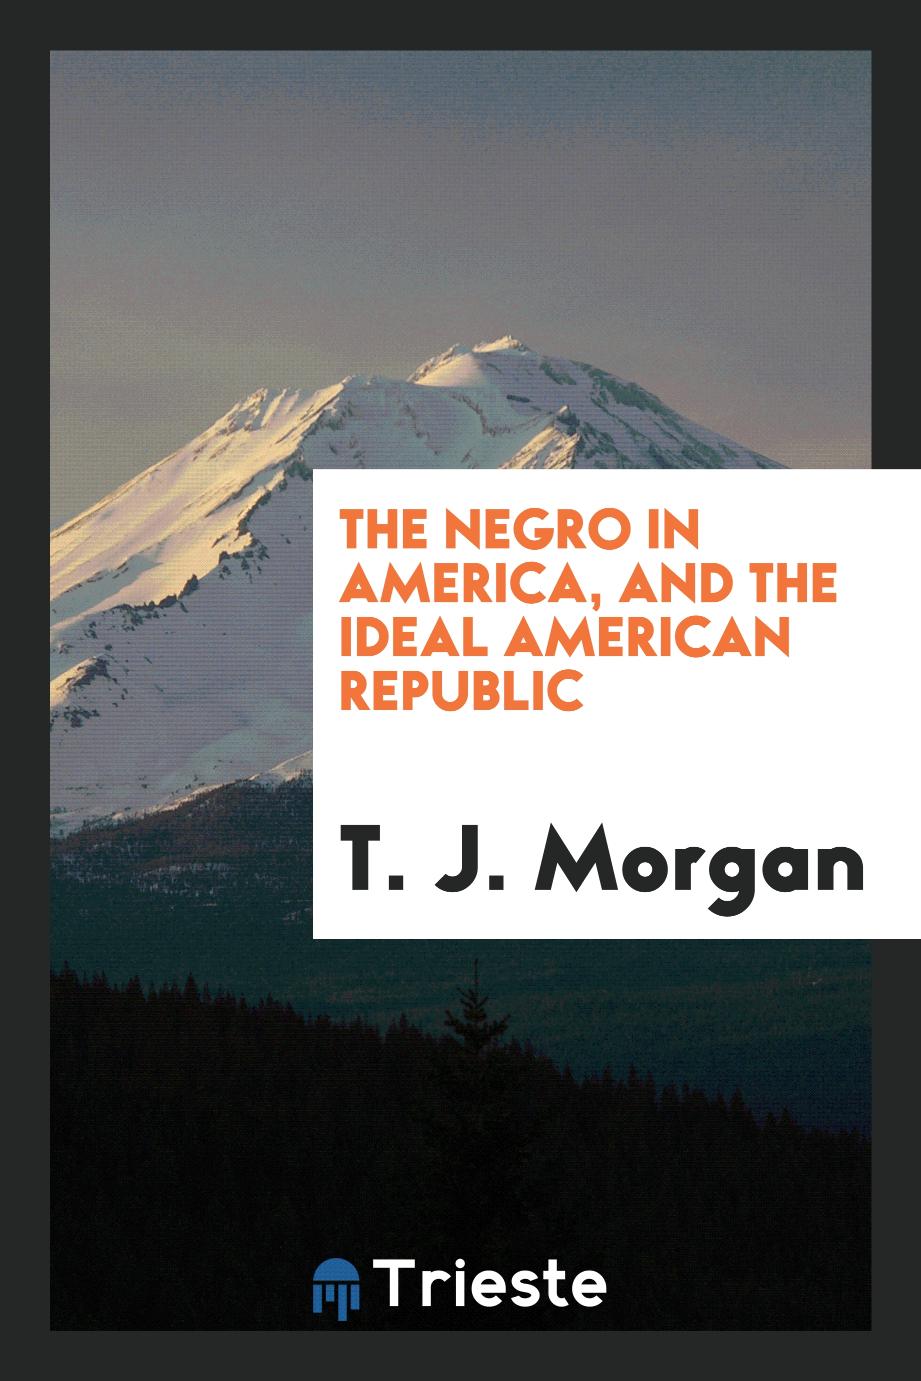 The negro in America, and the ideal American republic